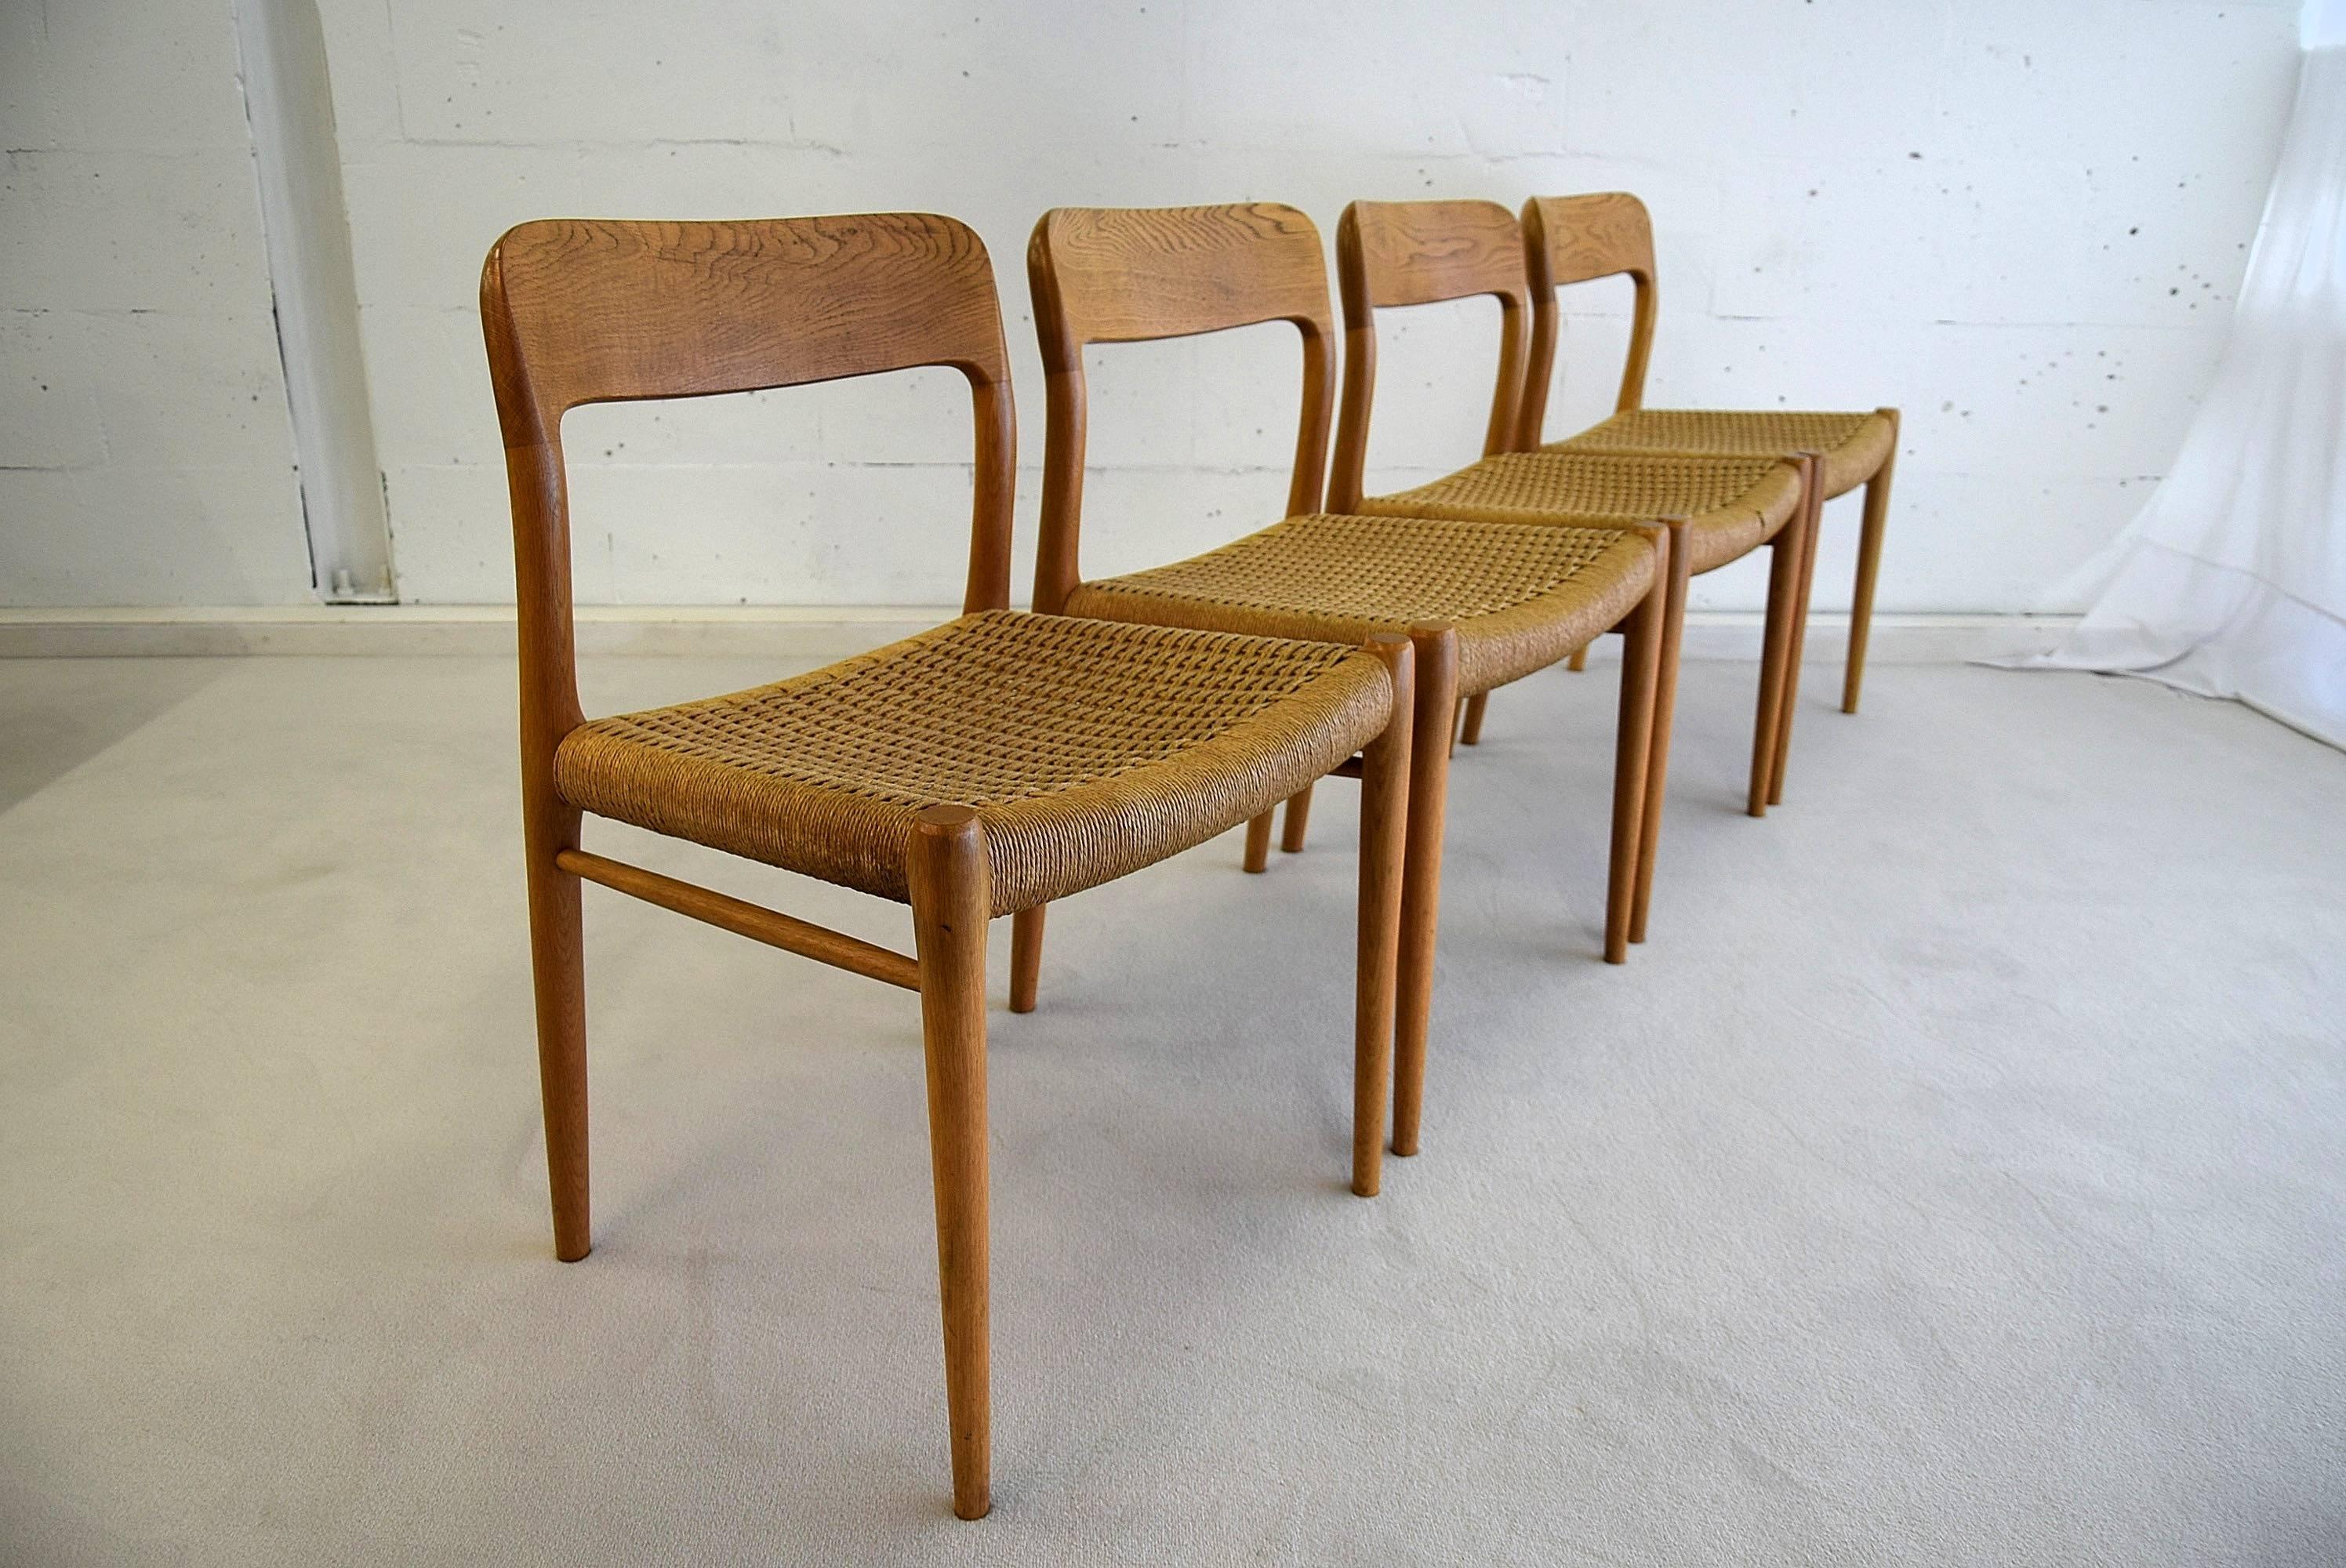 Oak 1950s dining set designed by Niels Møller for J.L. Møllers Møbelfabrik. The paper cord oak chairs are the model 75 and the oak table is extendable so it can sit up to eight people. Measurements: H 72 x W 91 x L 151/192 cm. Two chairs have minor